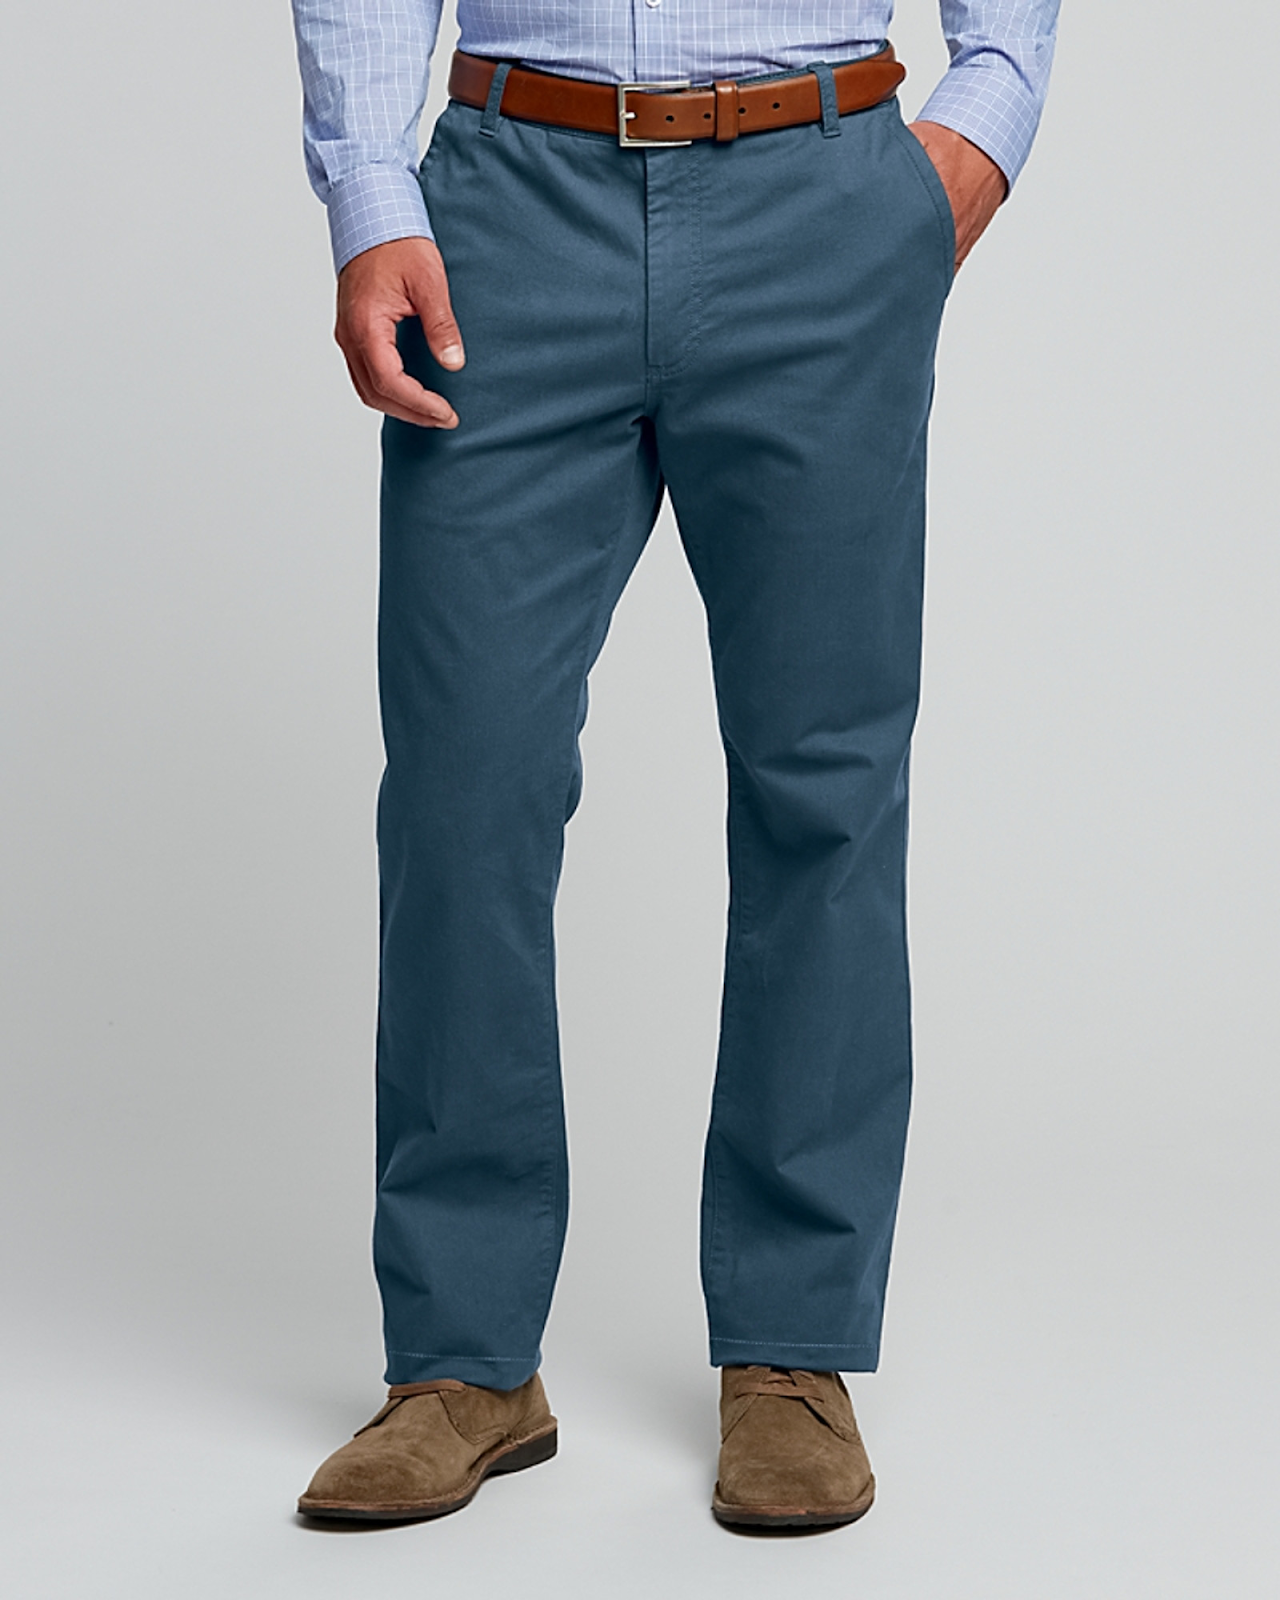 Men's Voyager Men's Chino Pants for a Father's Day gift